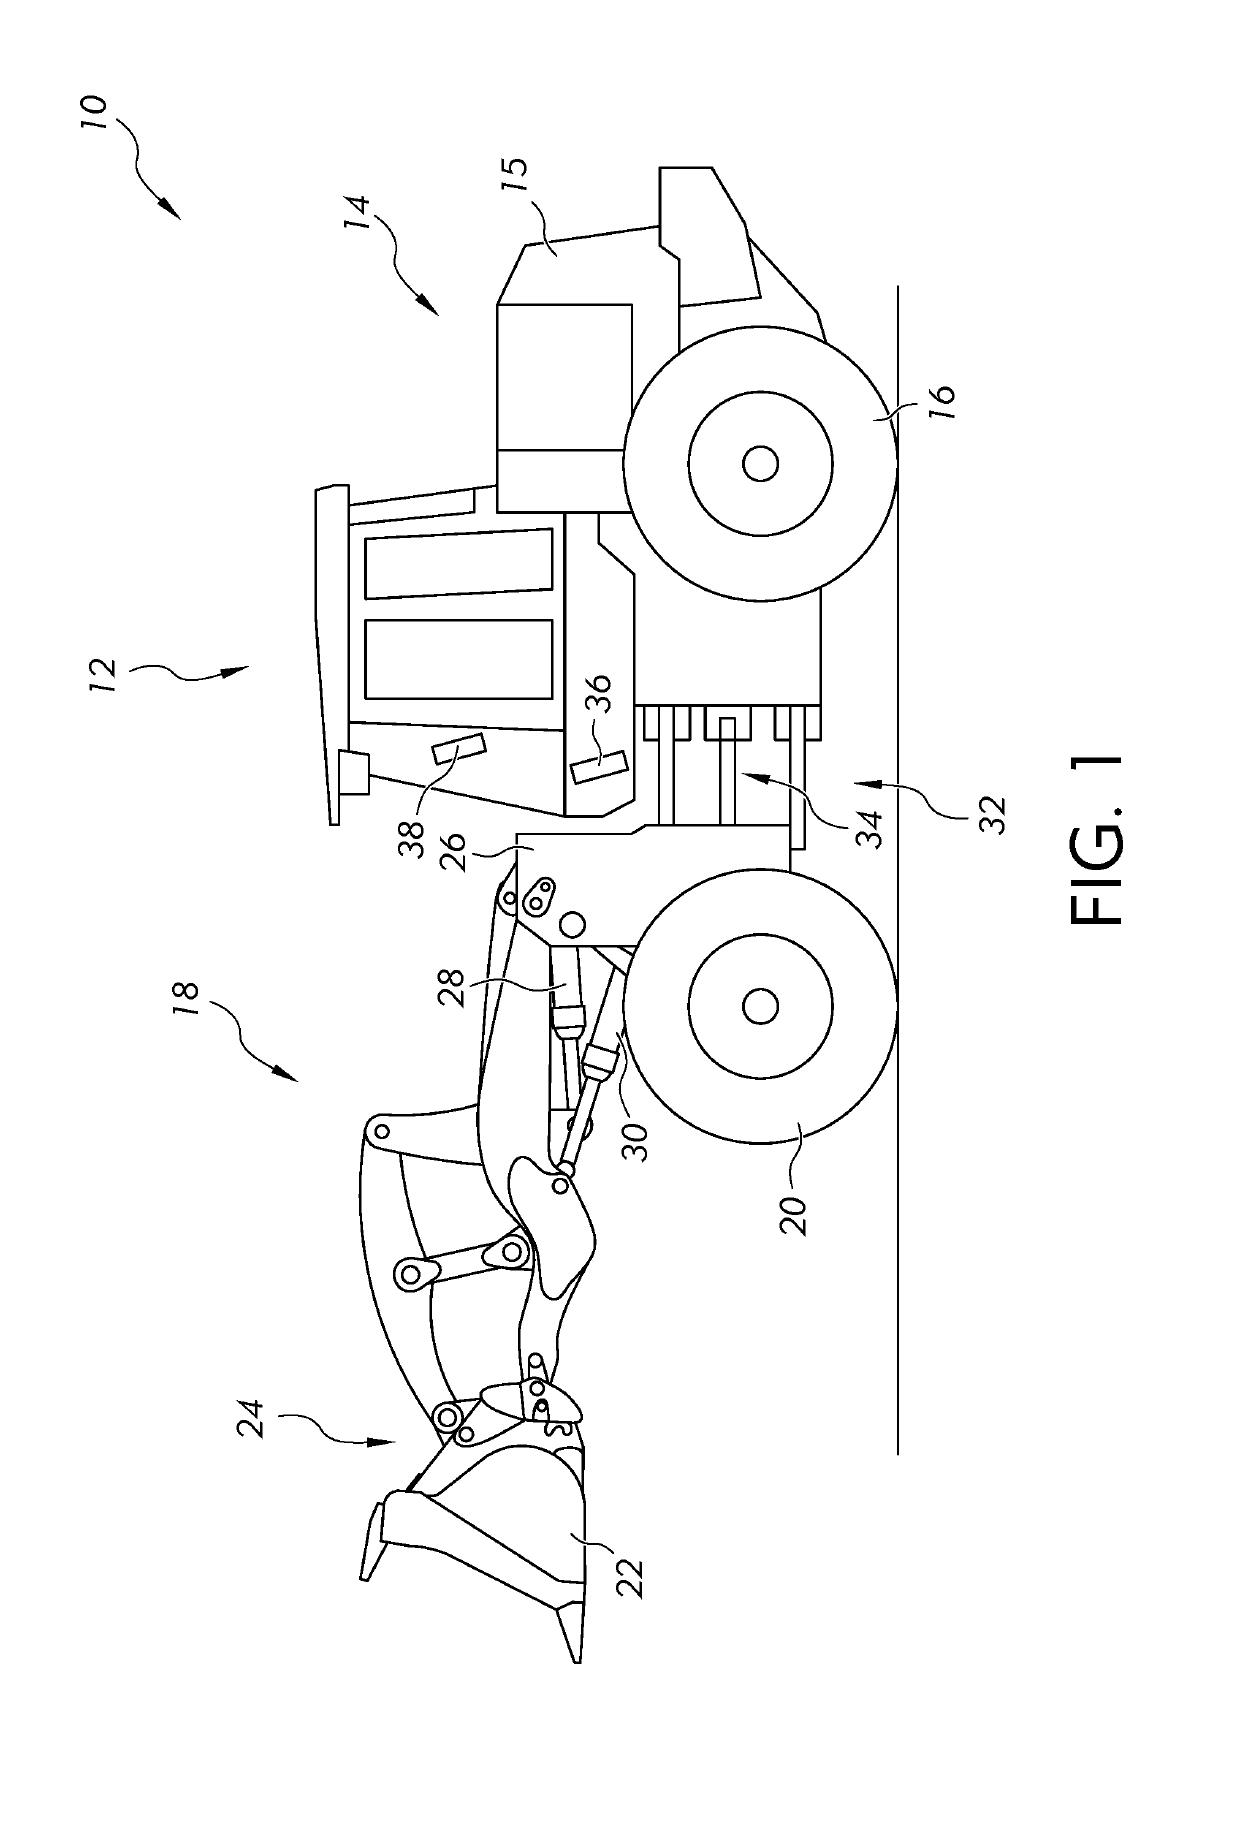 Method of removal of engine exhaust from a work machine and system thereof